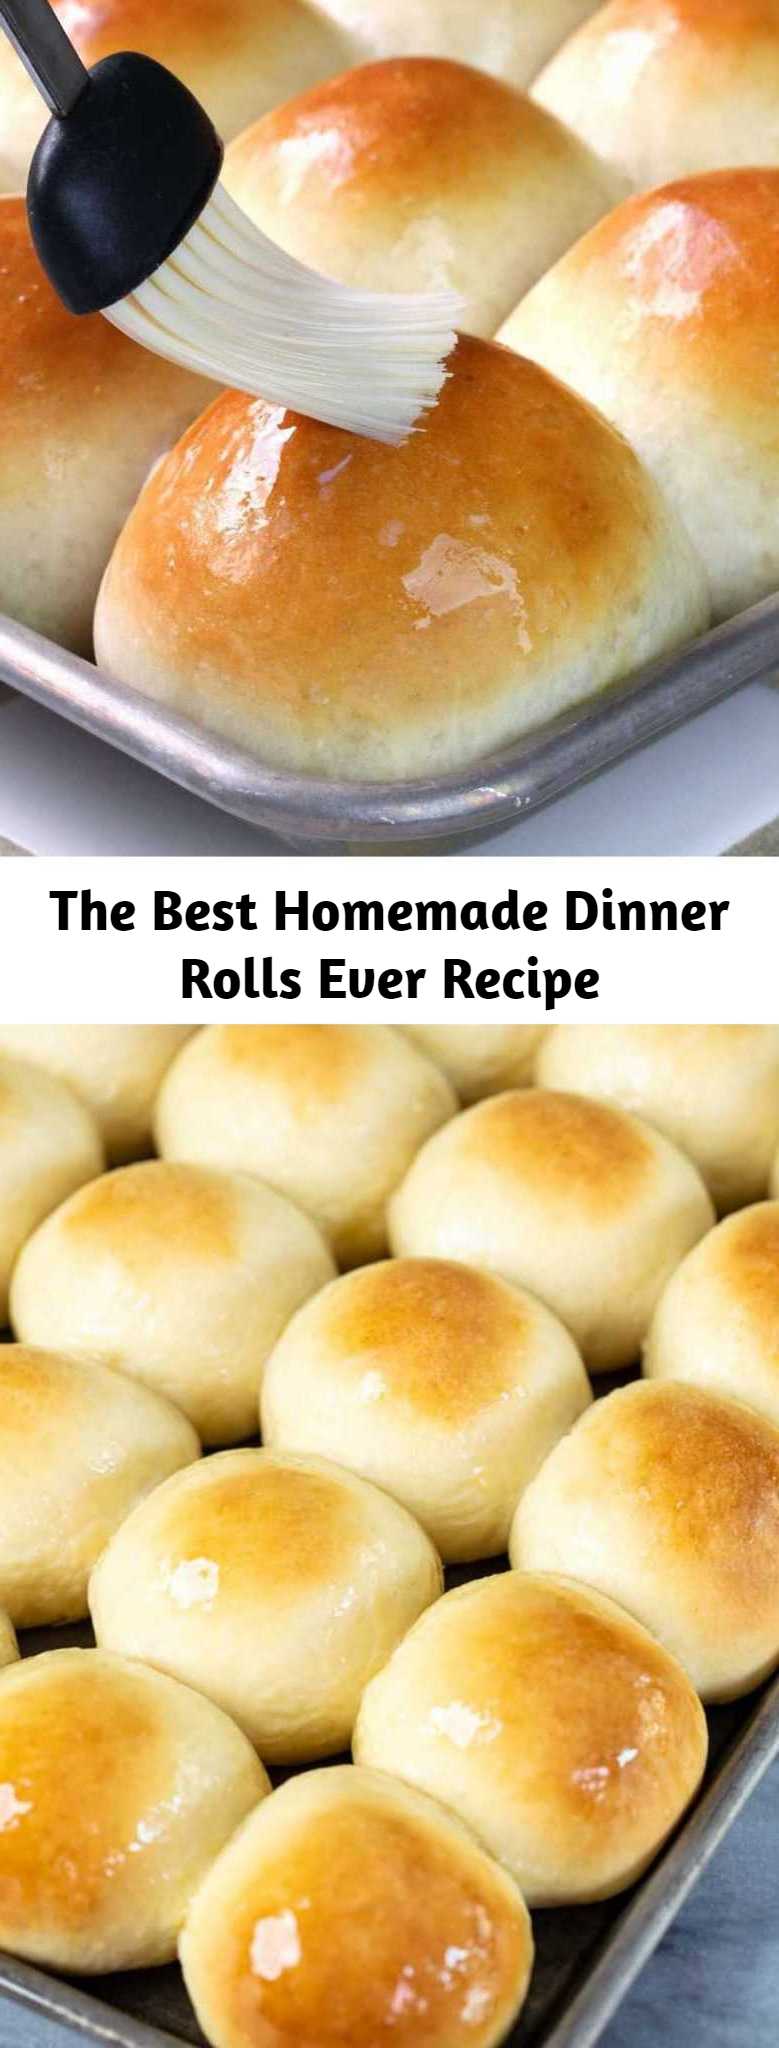 The Best Homemade Dinner Rolls Ever Recipe - Perfectly soft dinner rolls that melt in your mouth! These are truly the most amazing dinner rolls ever.